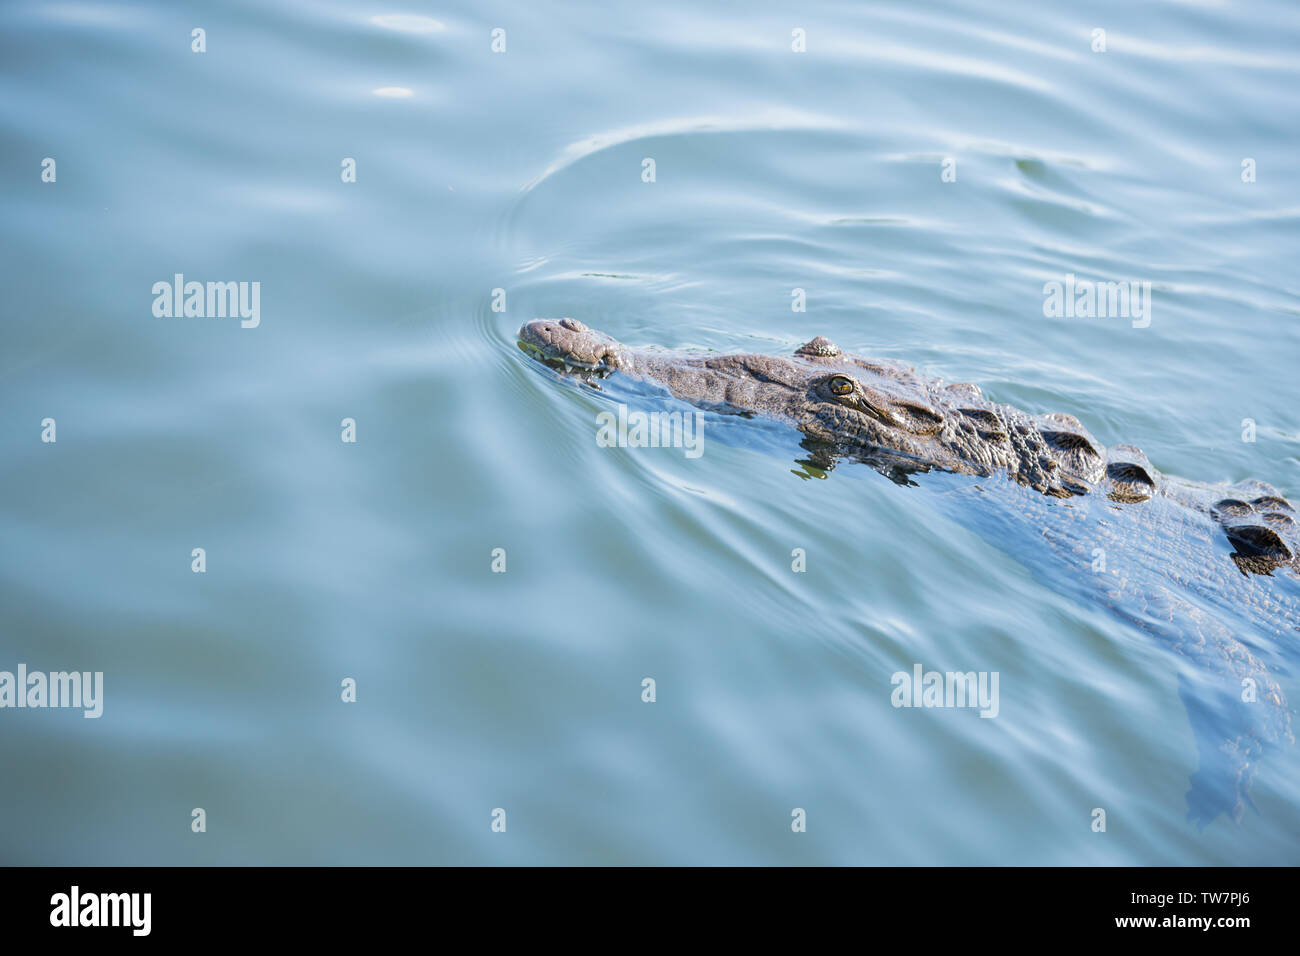 Crocodile swimming in the marsh with nose sticking up Stock Photo